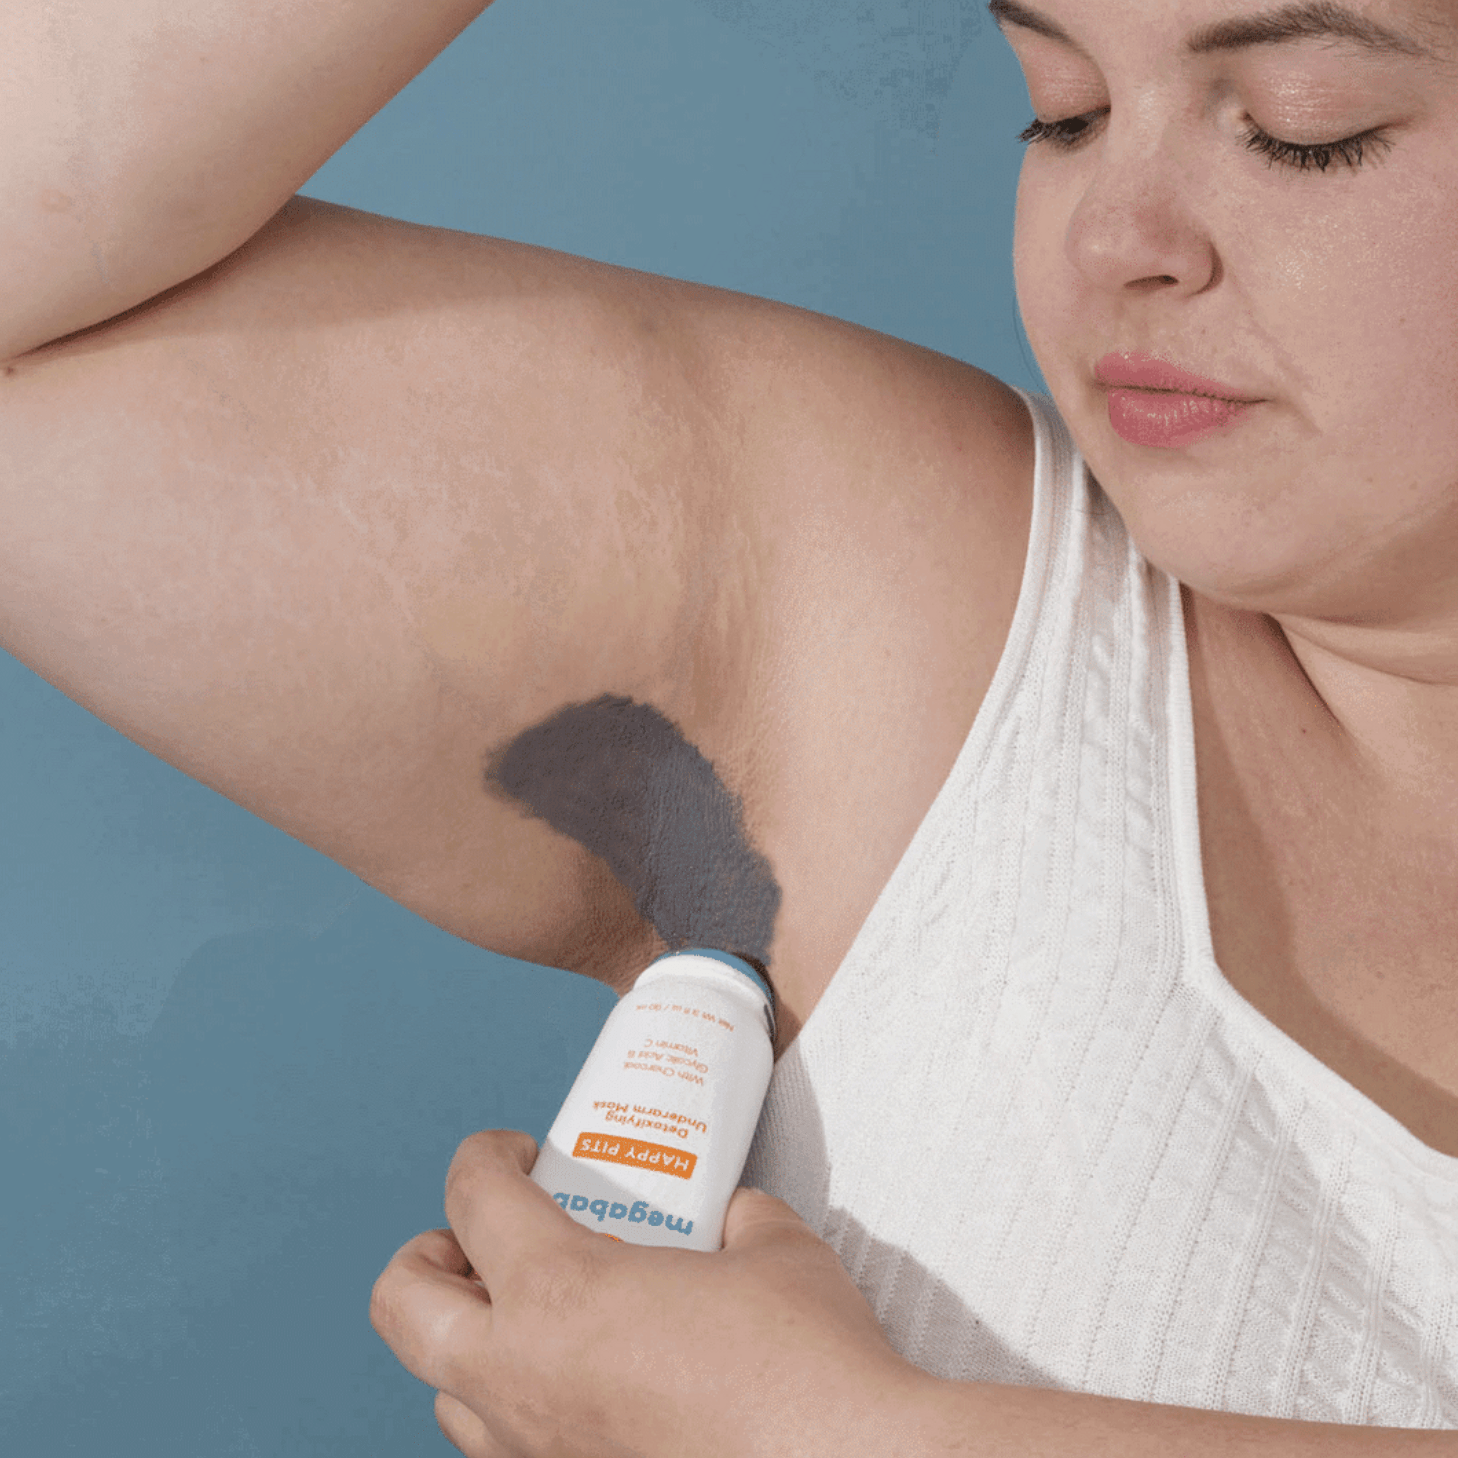 Armpit Detox: What Are the Benefits and Challenges?